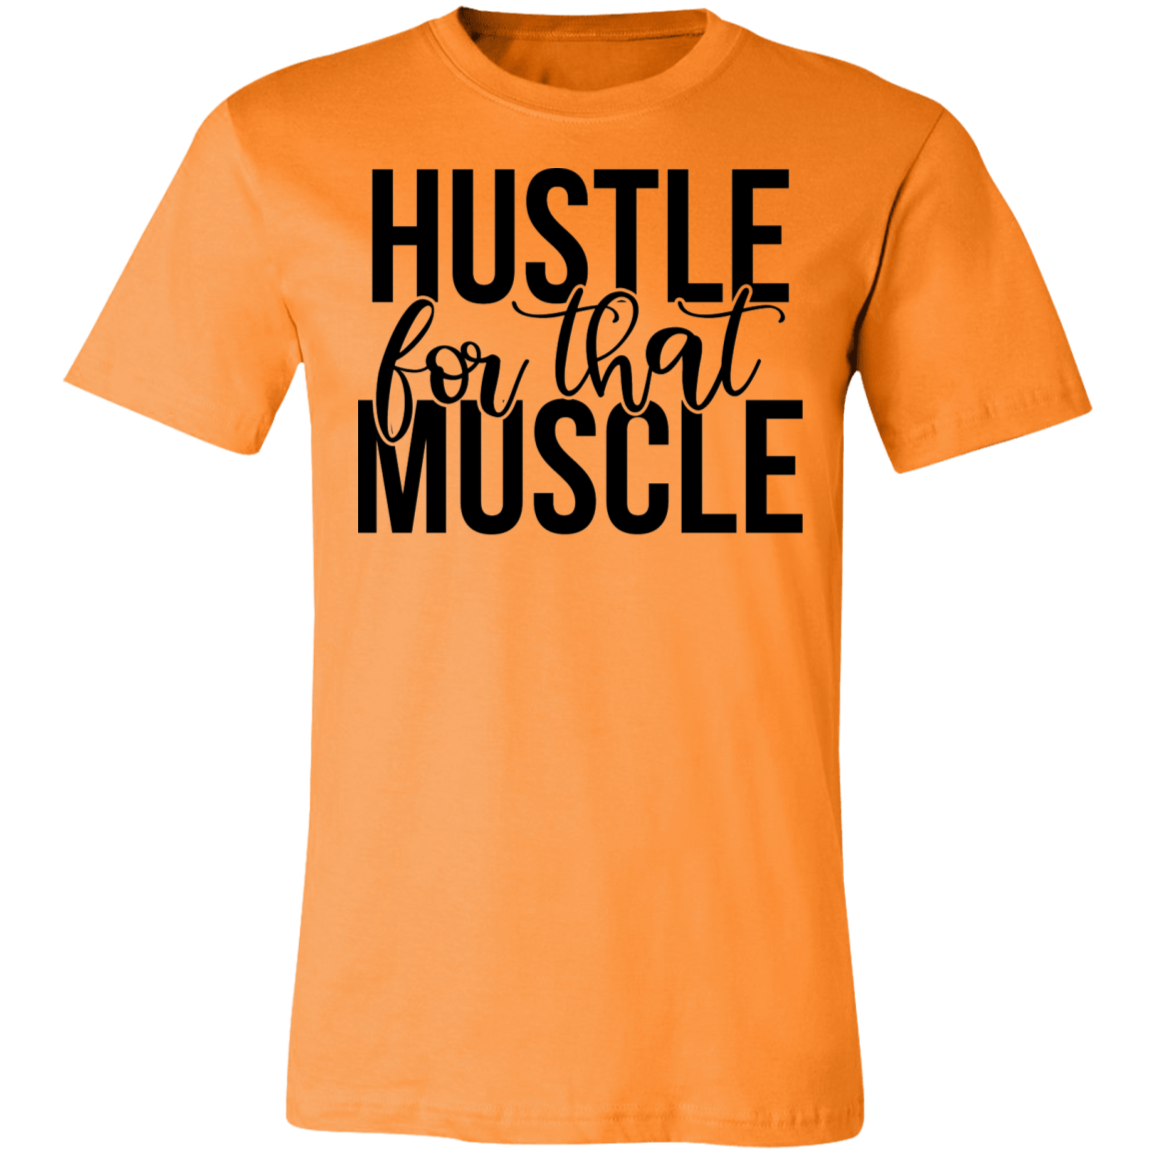 Hustle For Muscle Tee